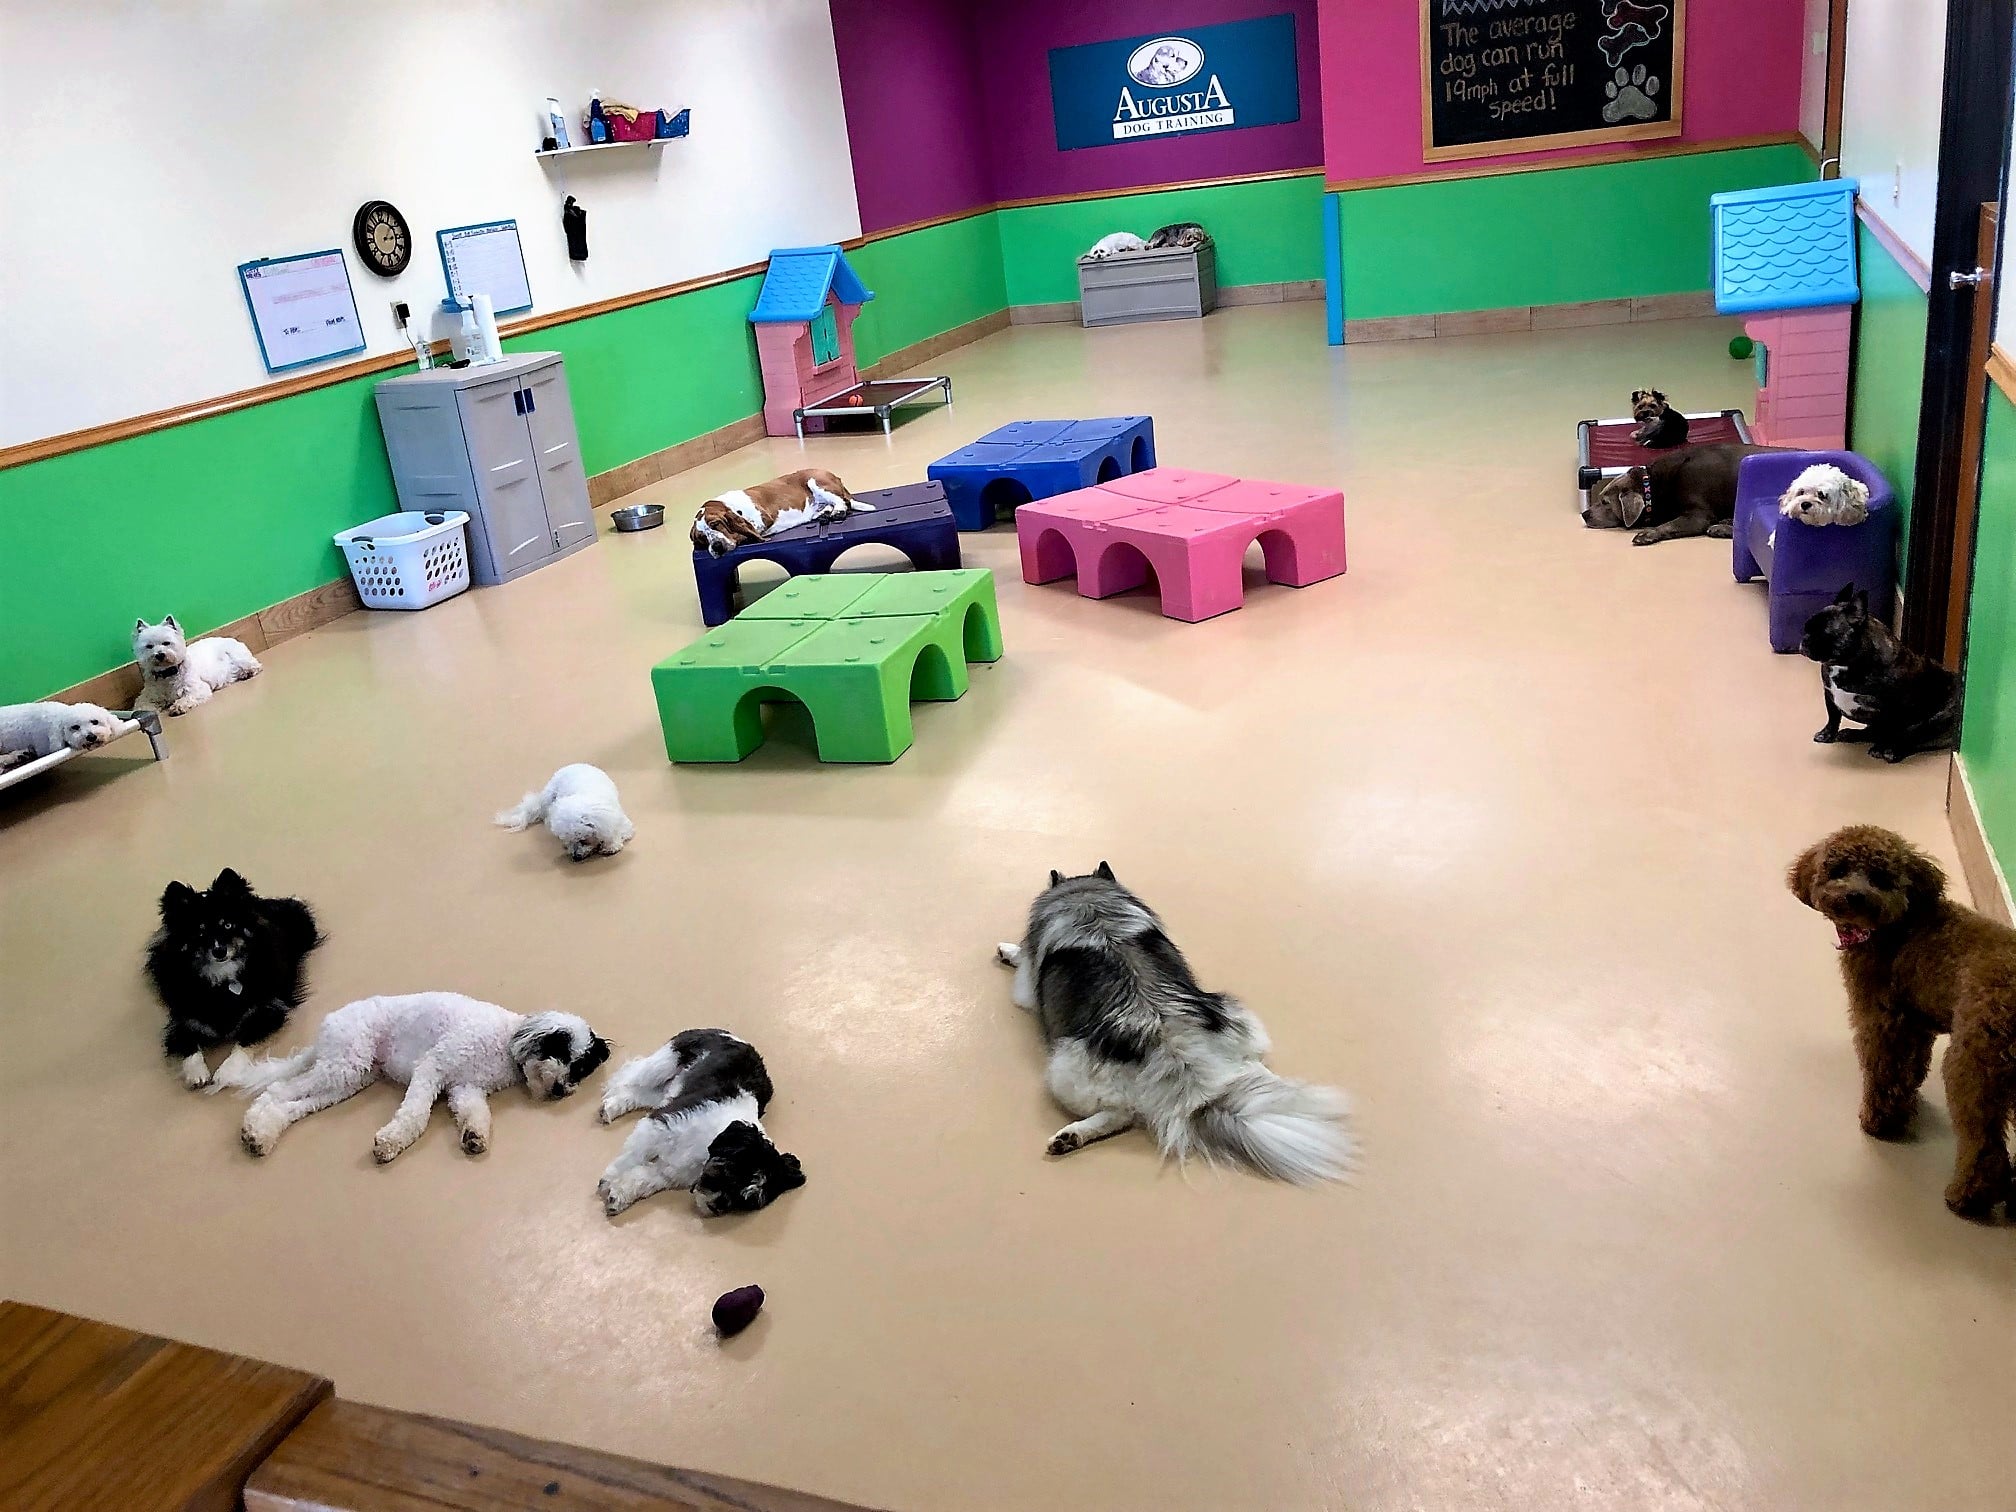 Tired dogs rest in the indoor Play and Train space at the Augusta Dog Training in Edina, Minnesota.